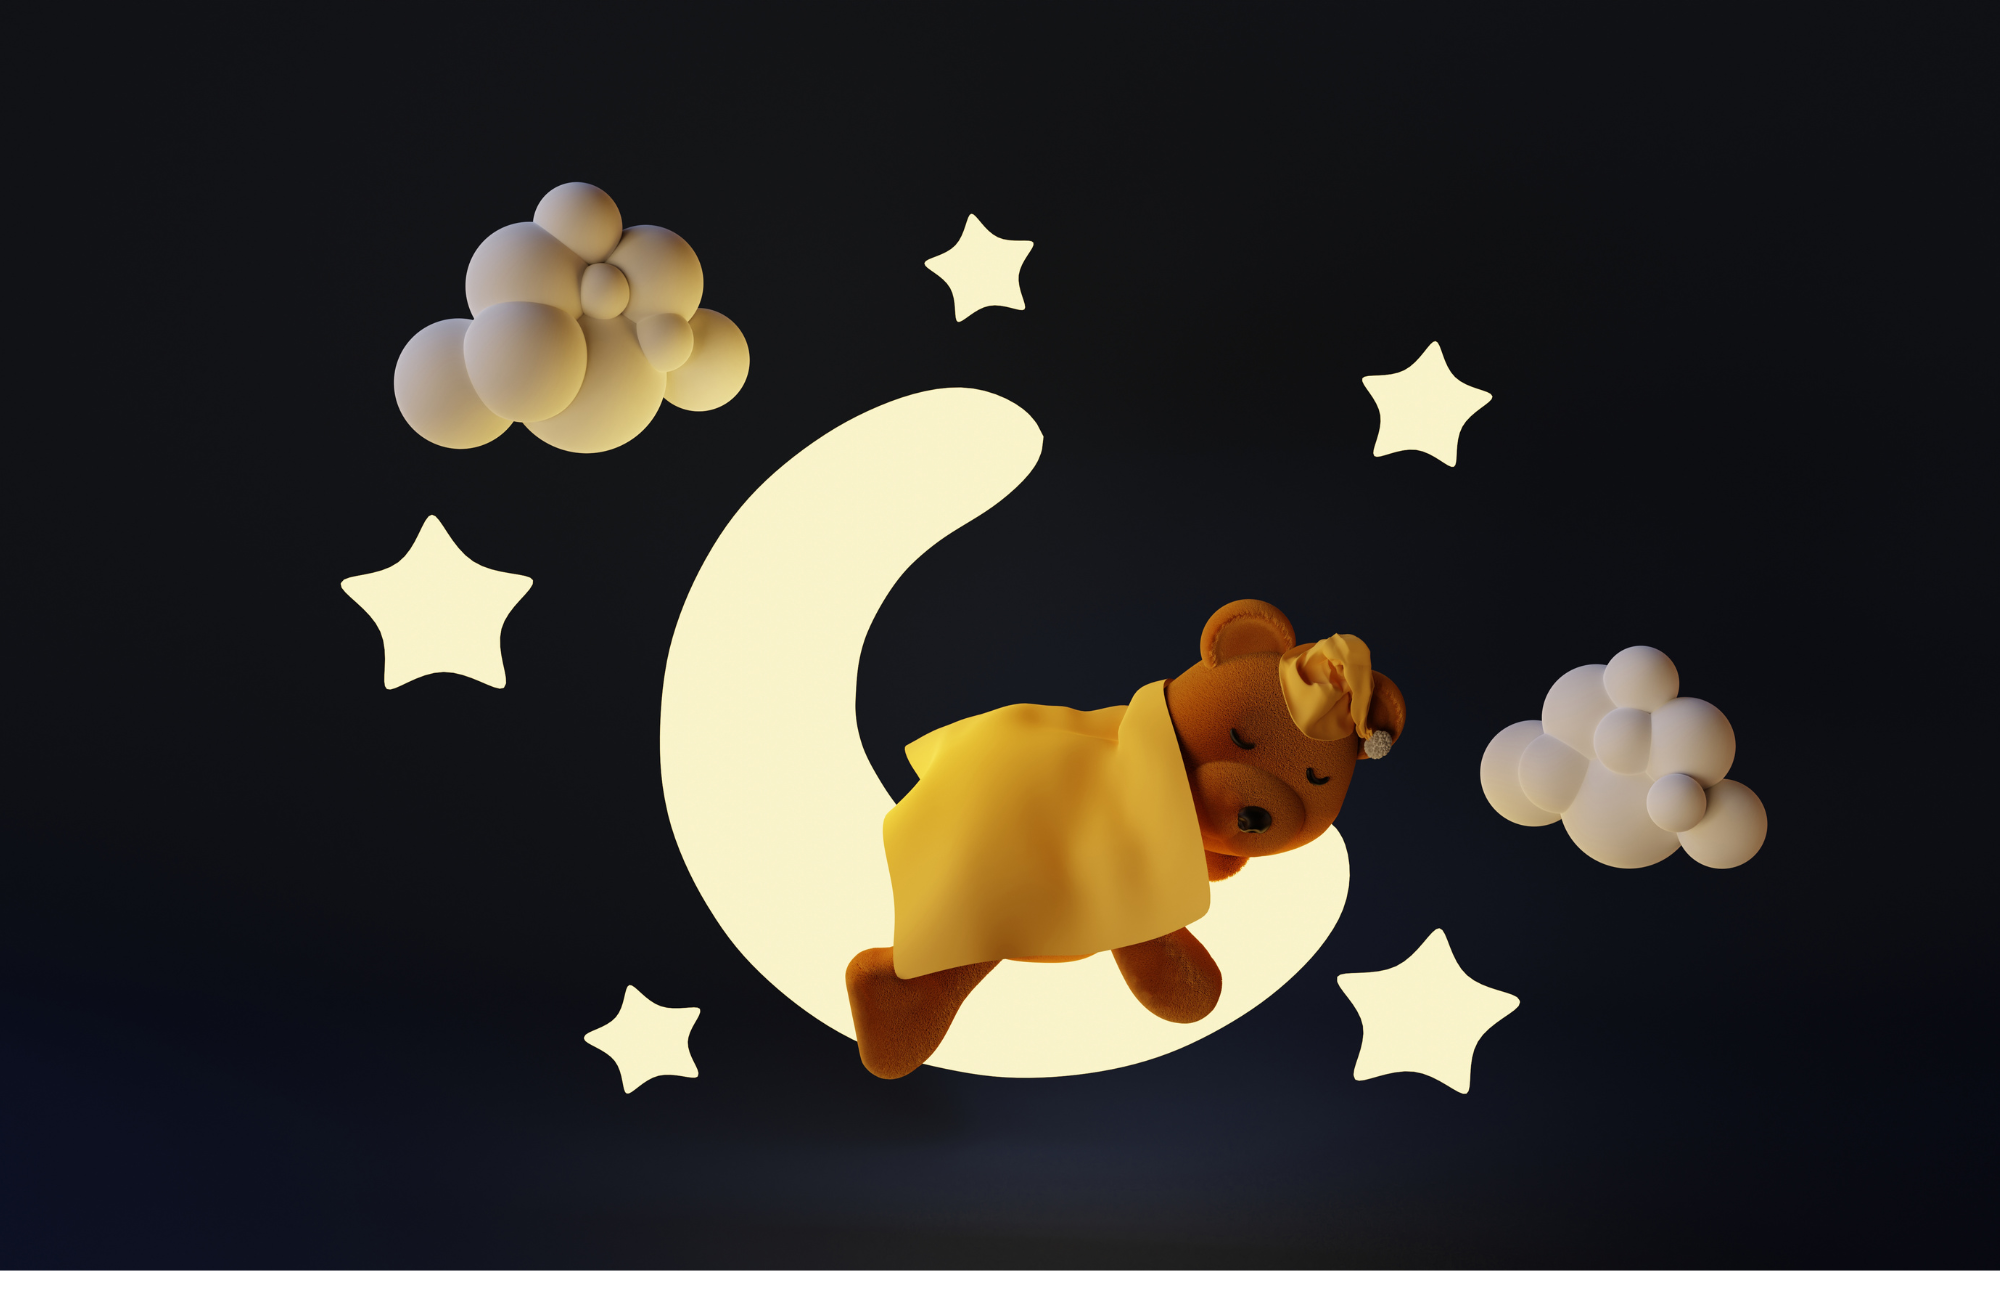 Teddy Bear sleeping on a crescent moon with stars and clouds around it. 